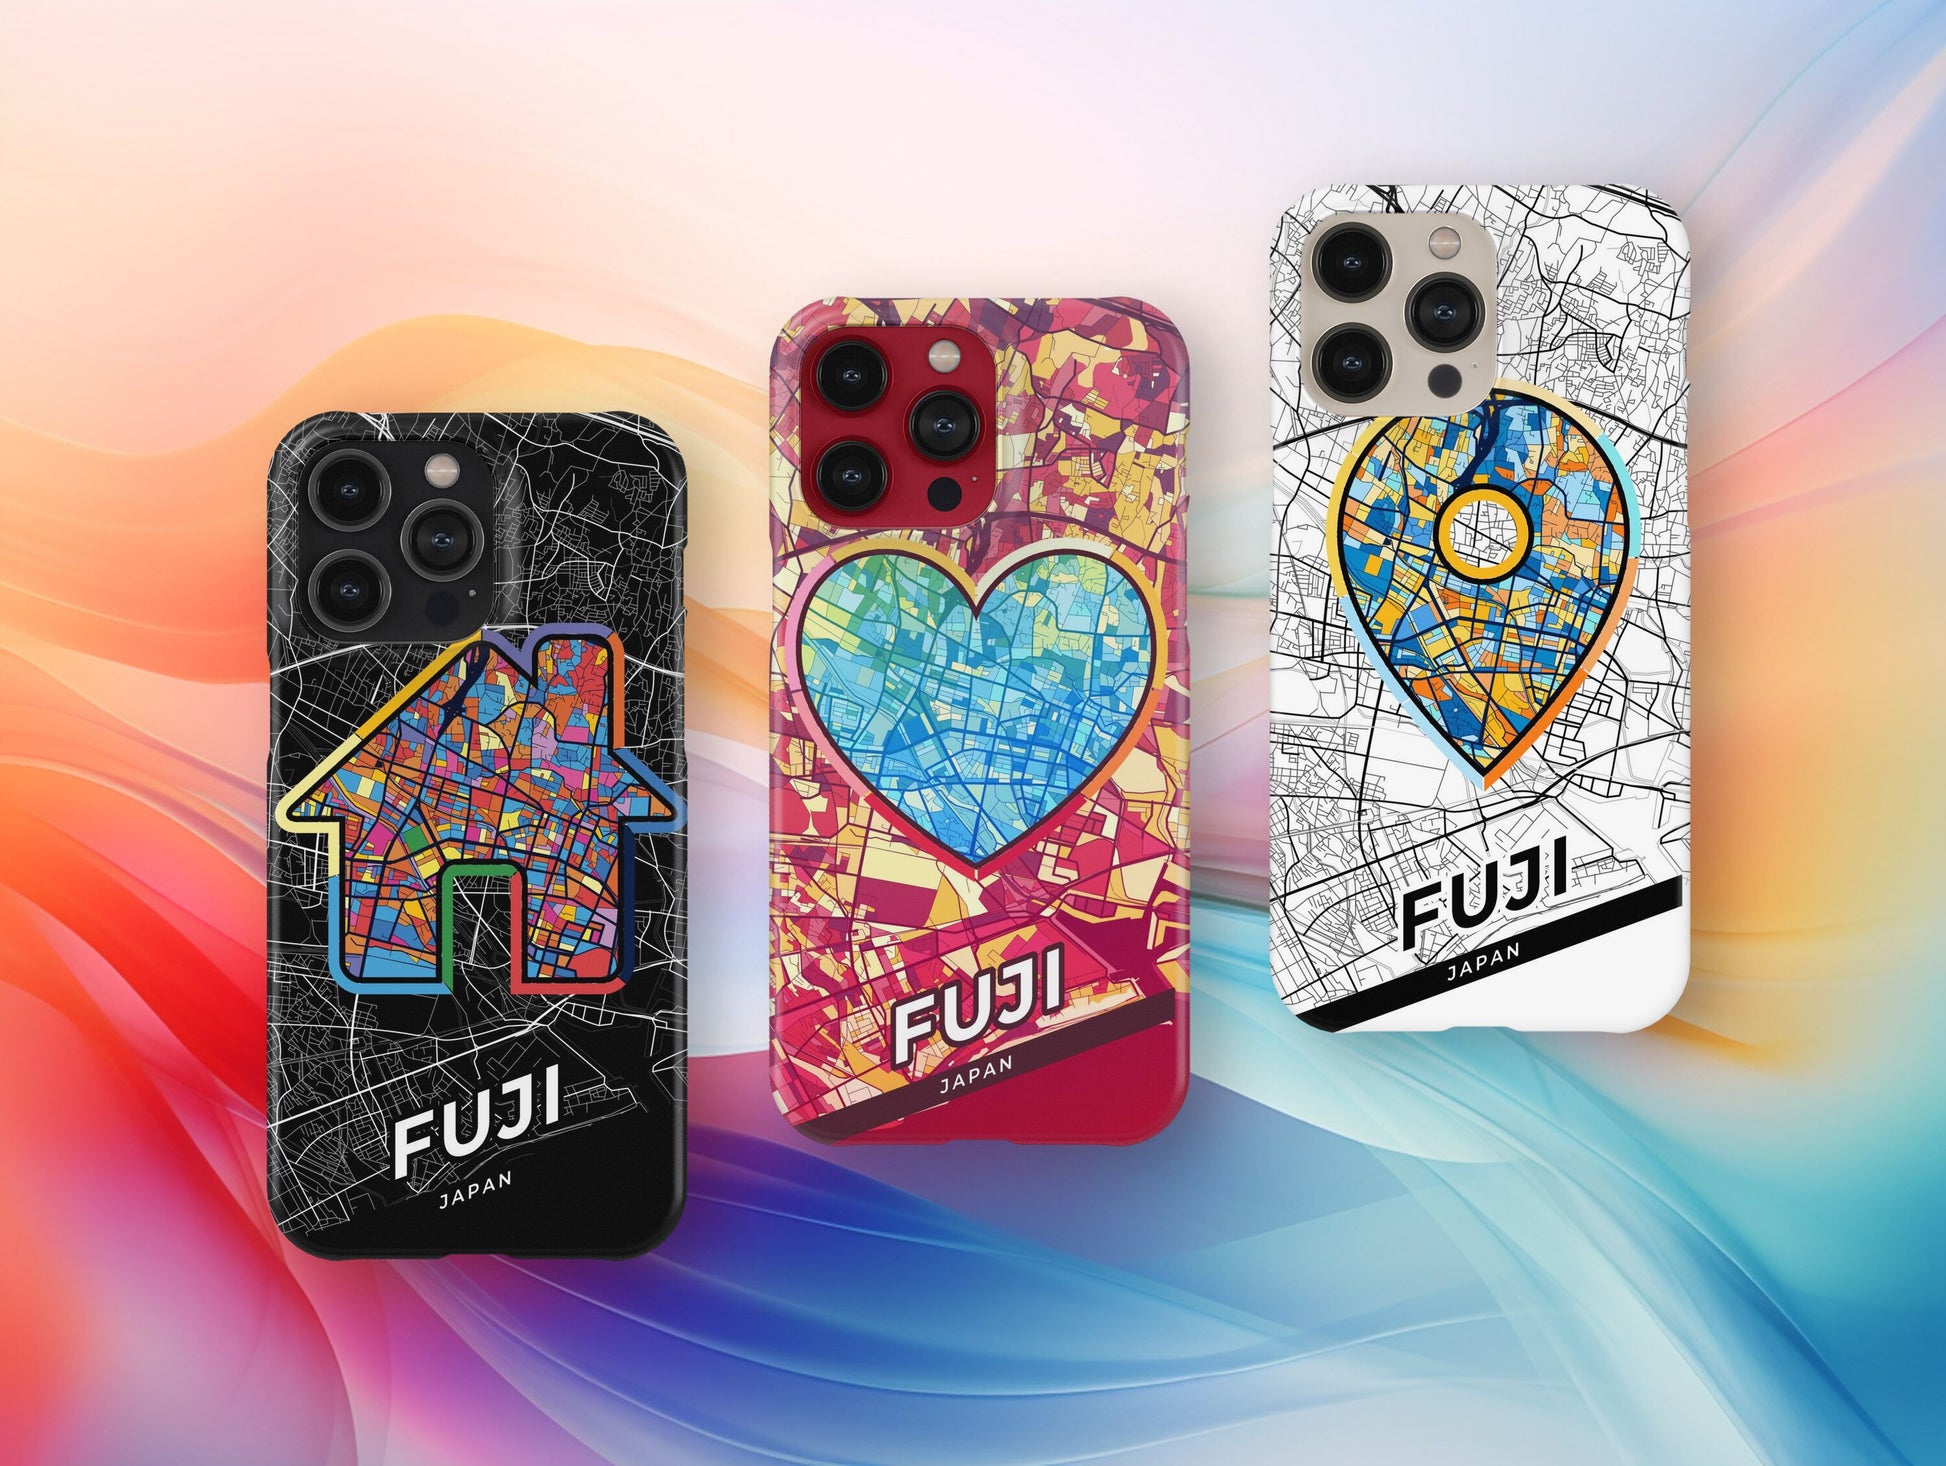 Fuji Japan slim phone case with colorful icon. Birthday, wedding or housewarming gift. Couple match cases.